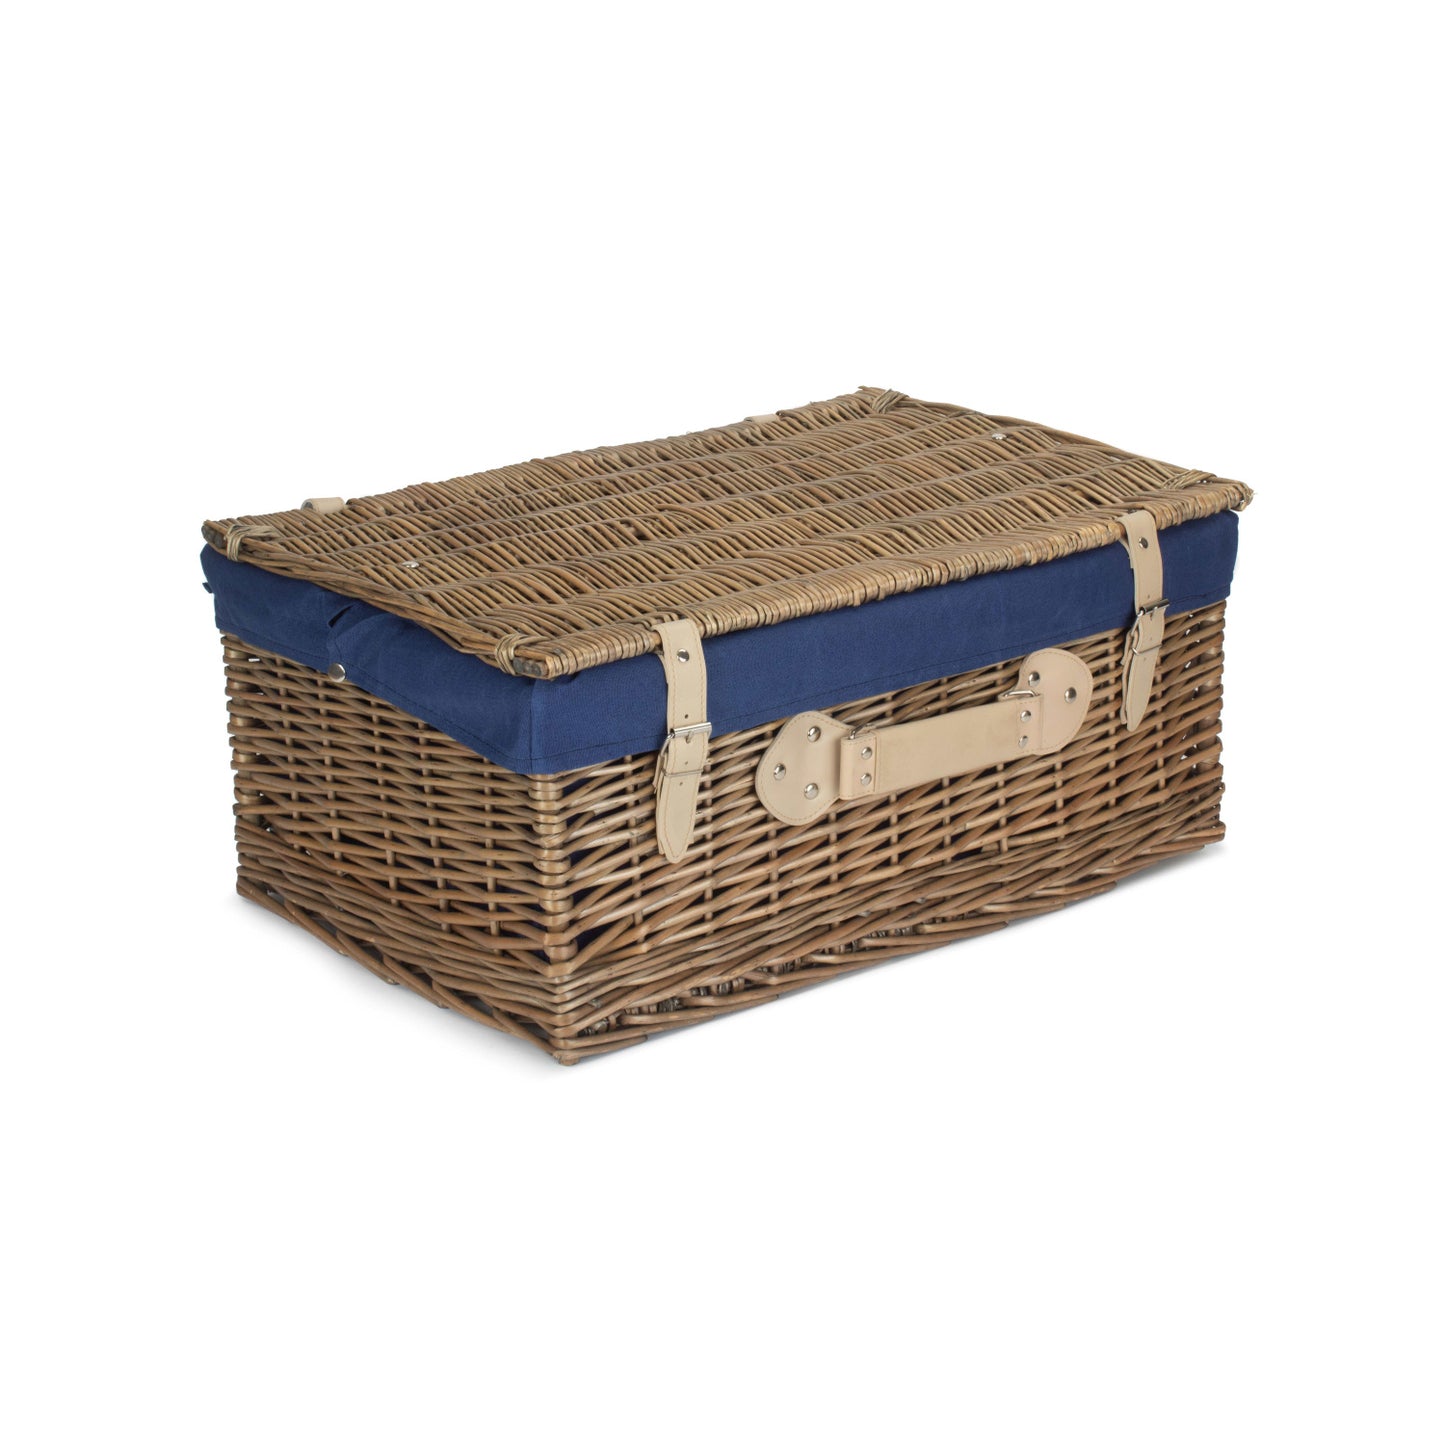 22 Inch Antique Wash Hamper With Navy Blue Lining